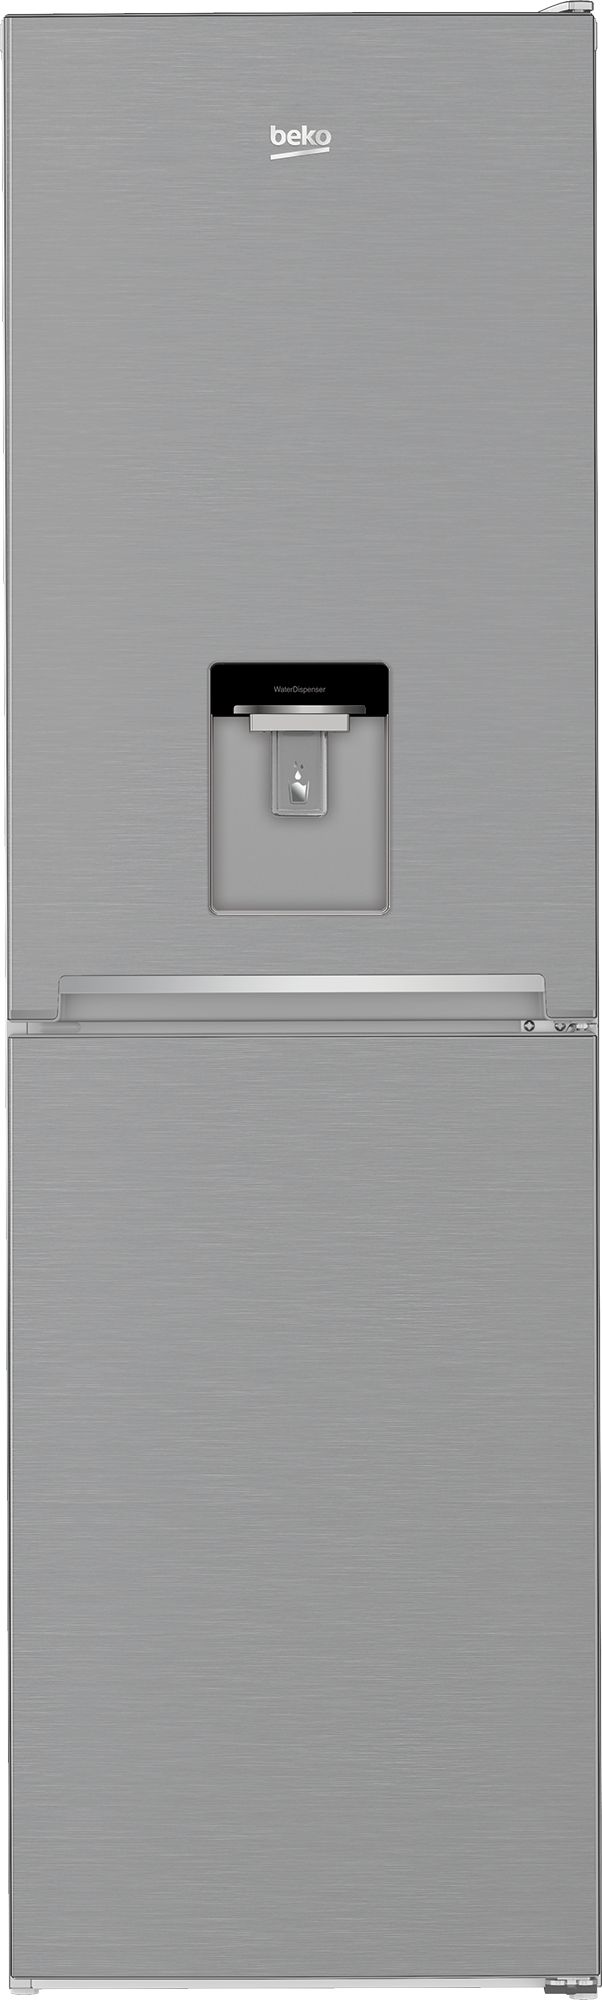 Beko CNG4582DVPS 50/50 Frost Free Fridge Freezer - Stainless Steel Effect - E Rated, Stainless Steel